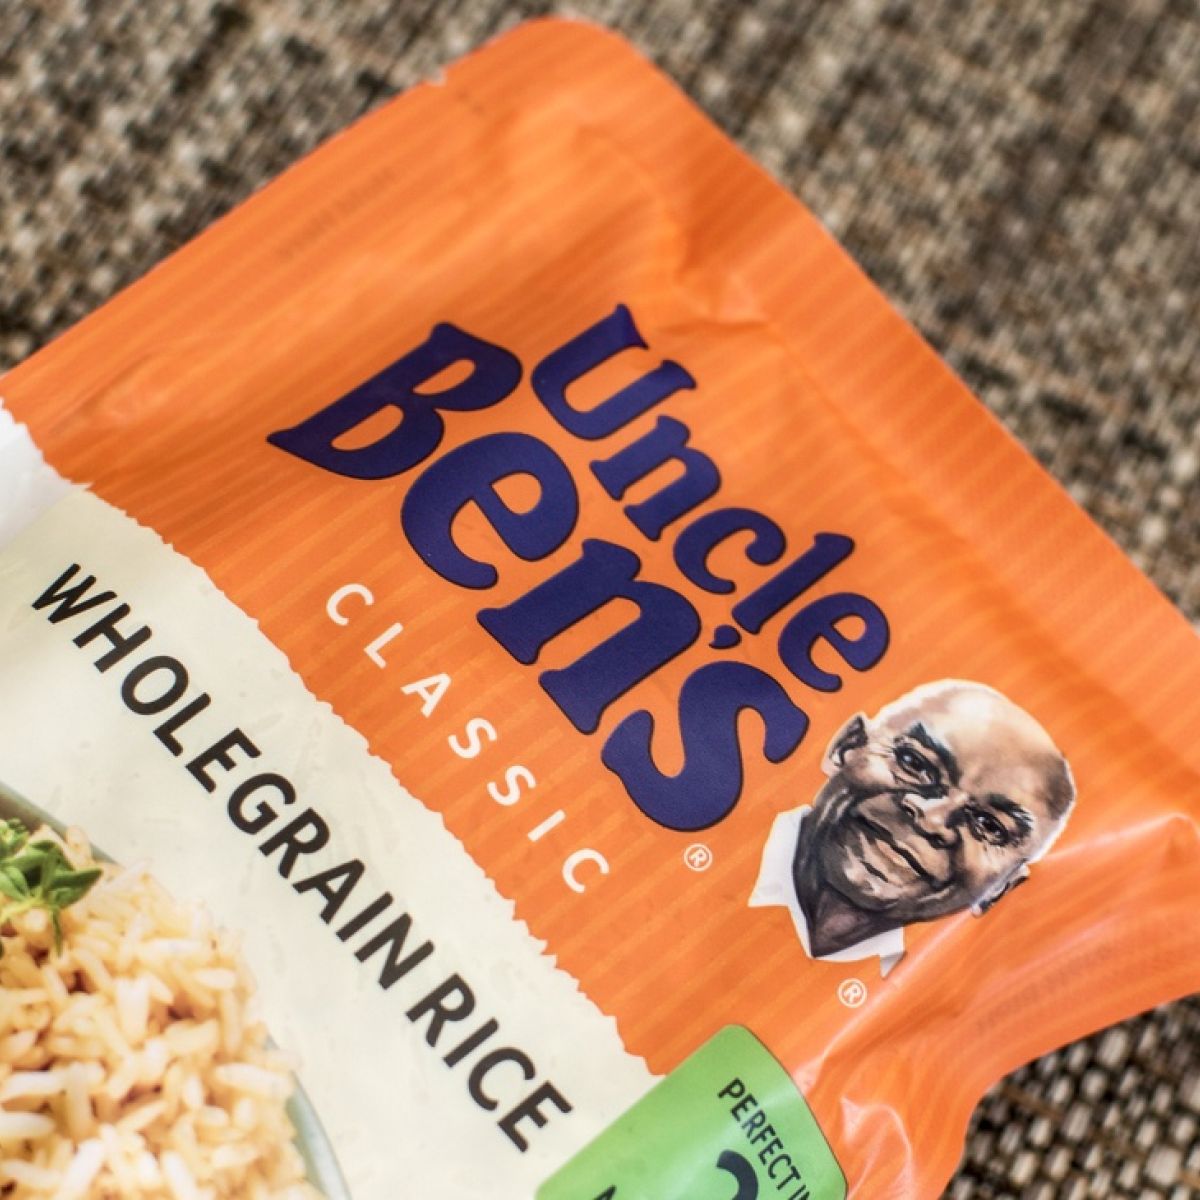 Mars Drops Uncle Ben S Brand For Promoting Racial Stereotype